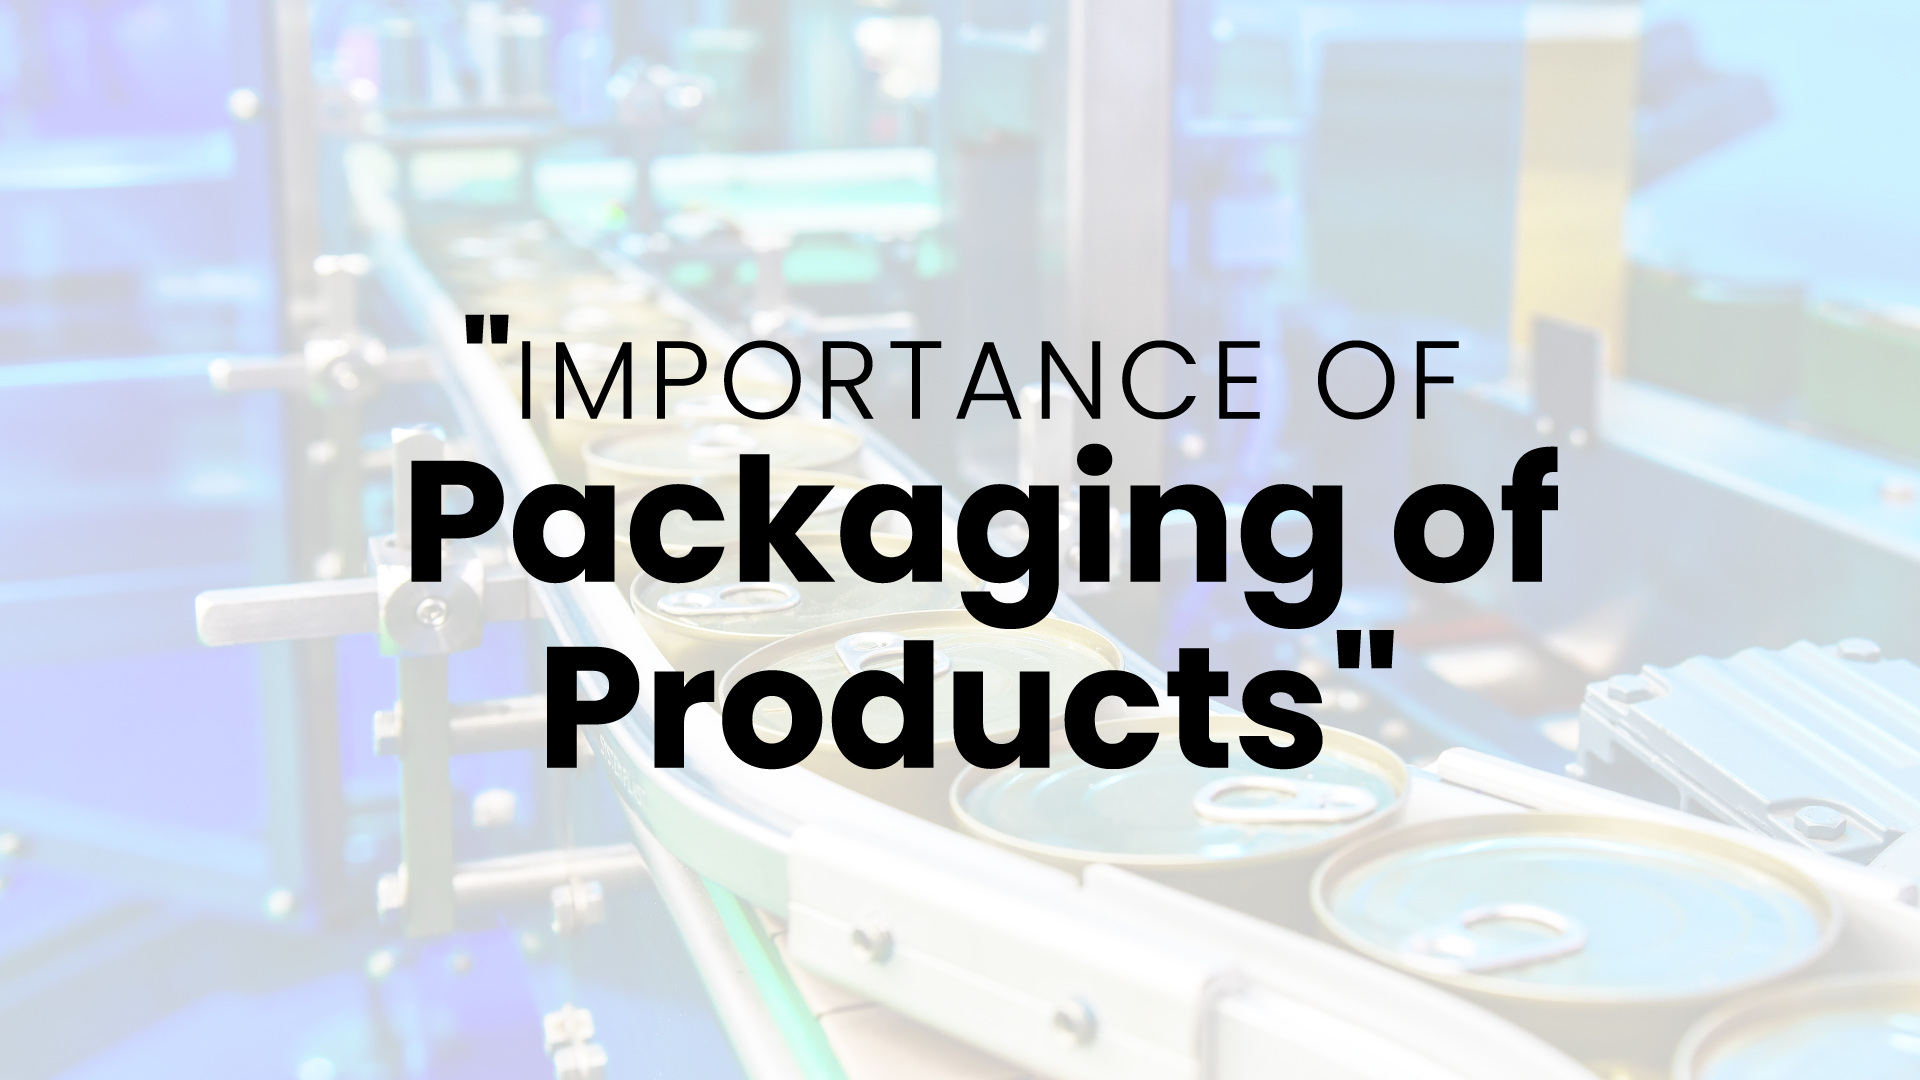 The Importance of Packaging of Products